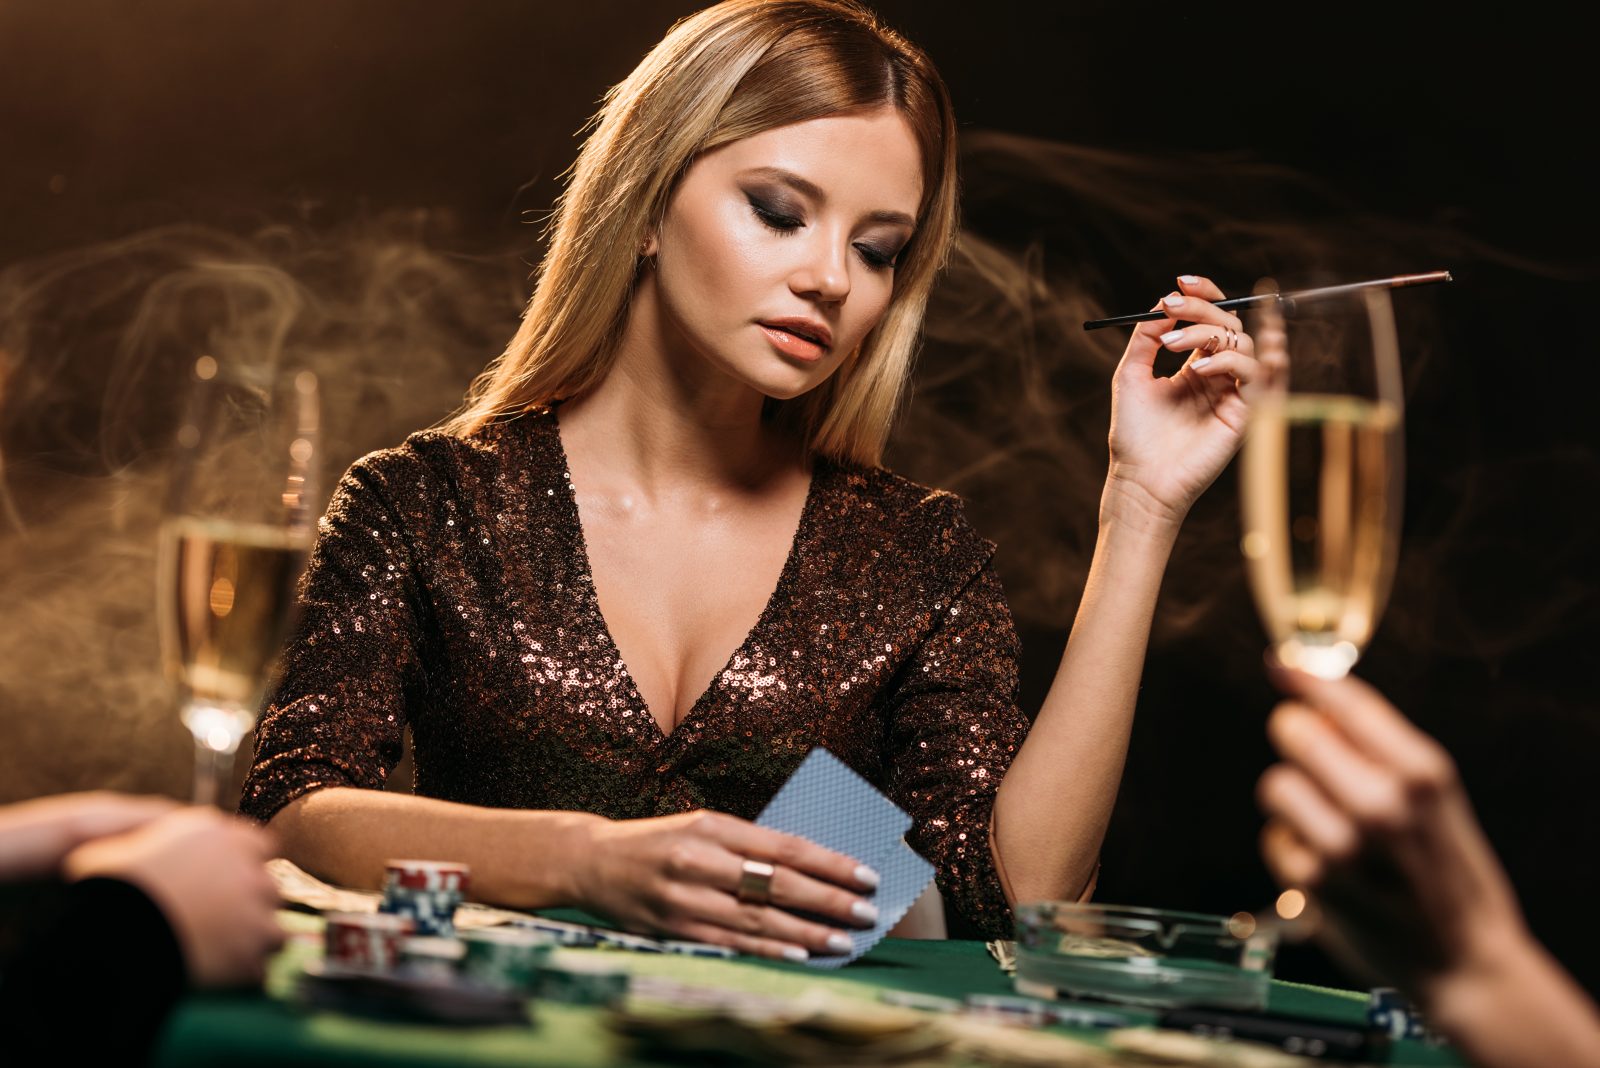 What to Wear Before Visiting a Casino